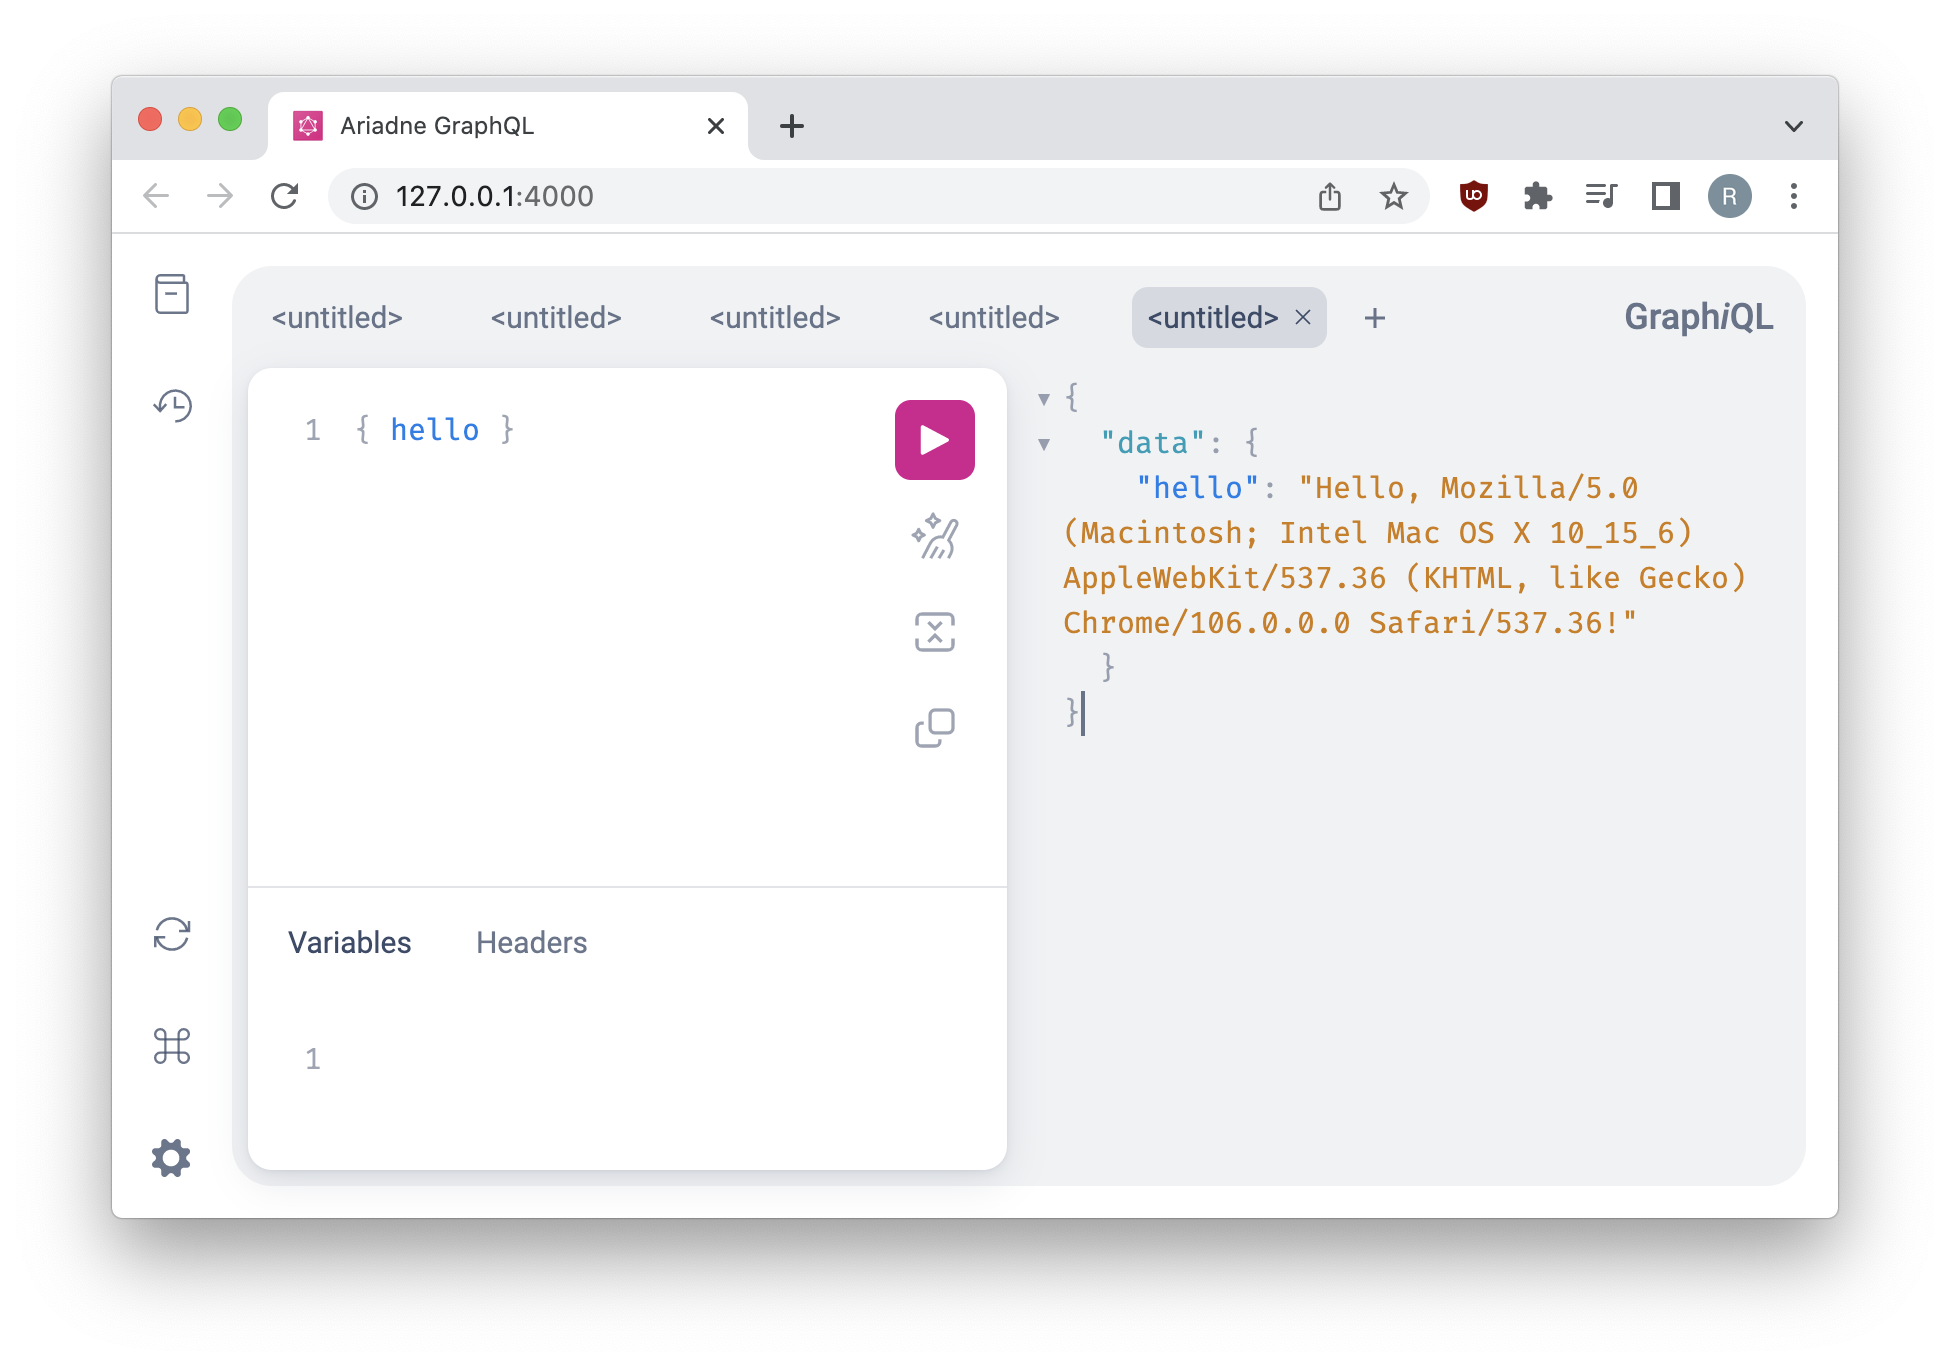 Your first Ariadne GraphQL in action!